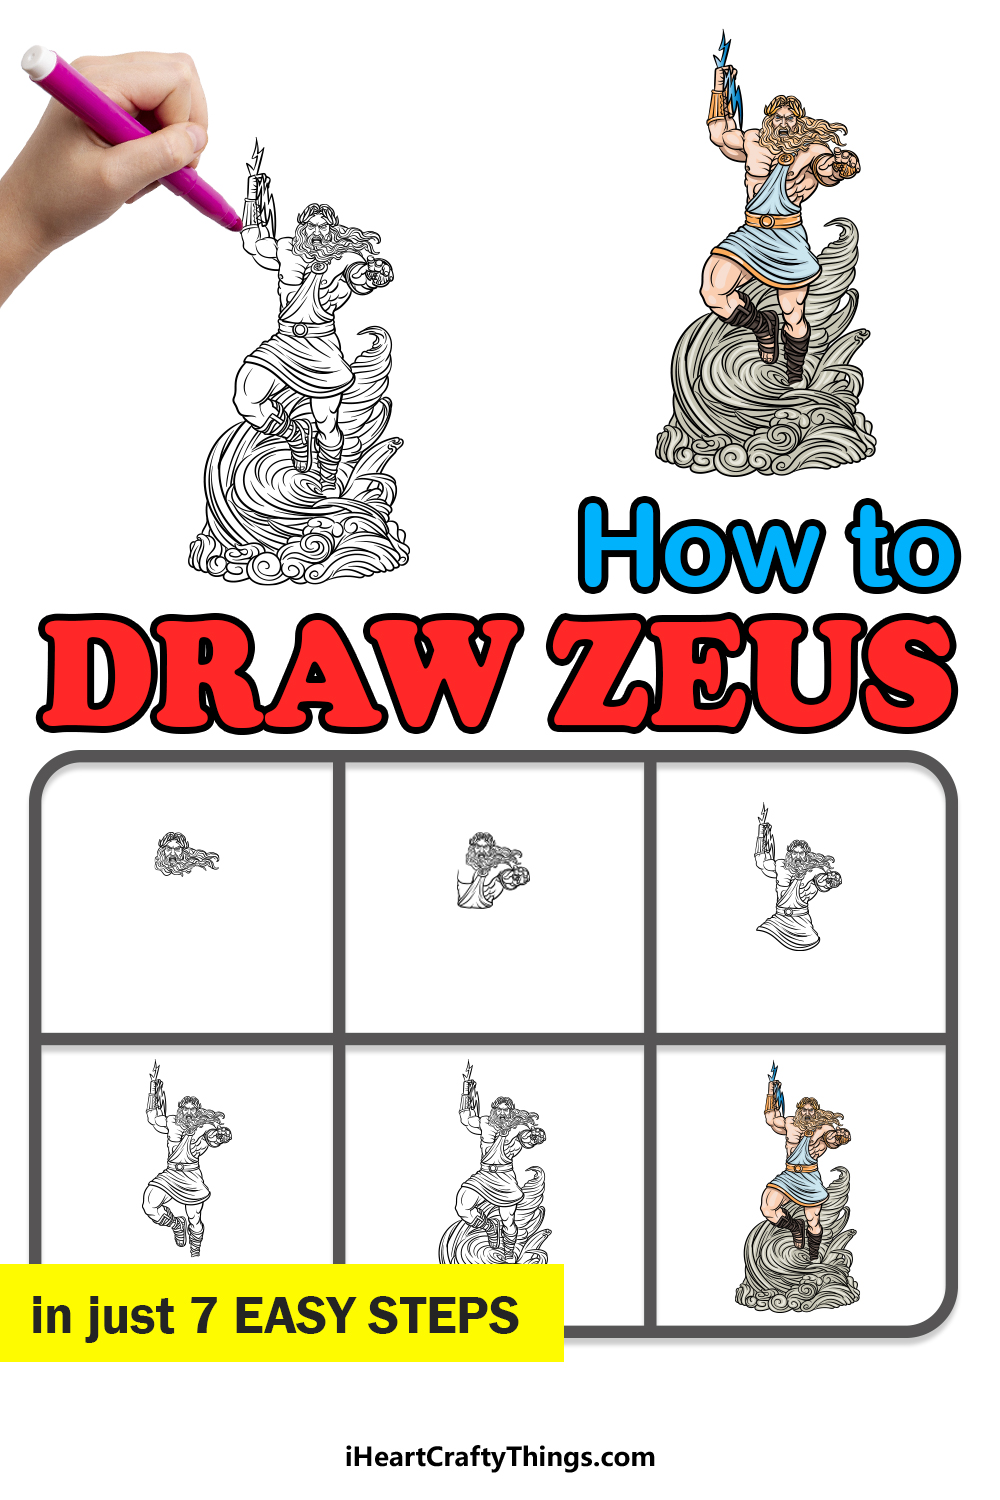 how to draw Zeus in 7 easy steps